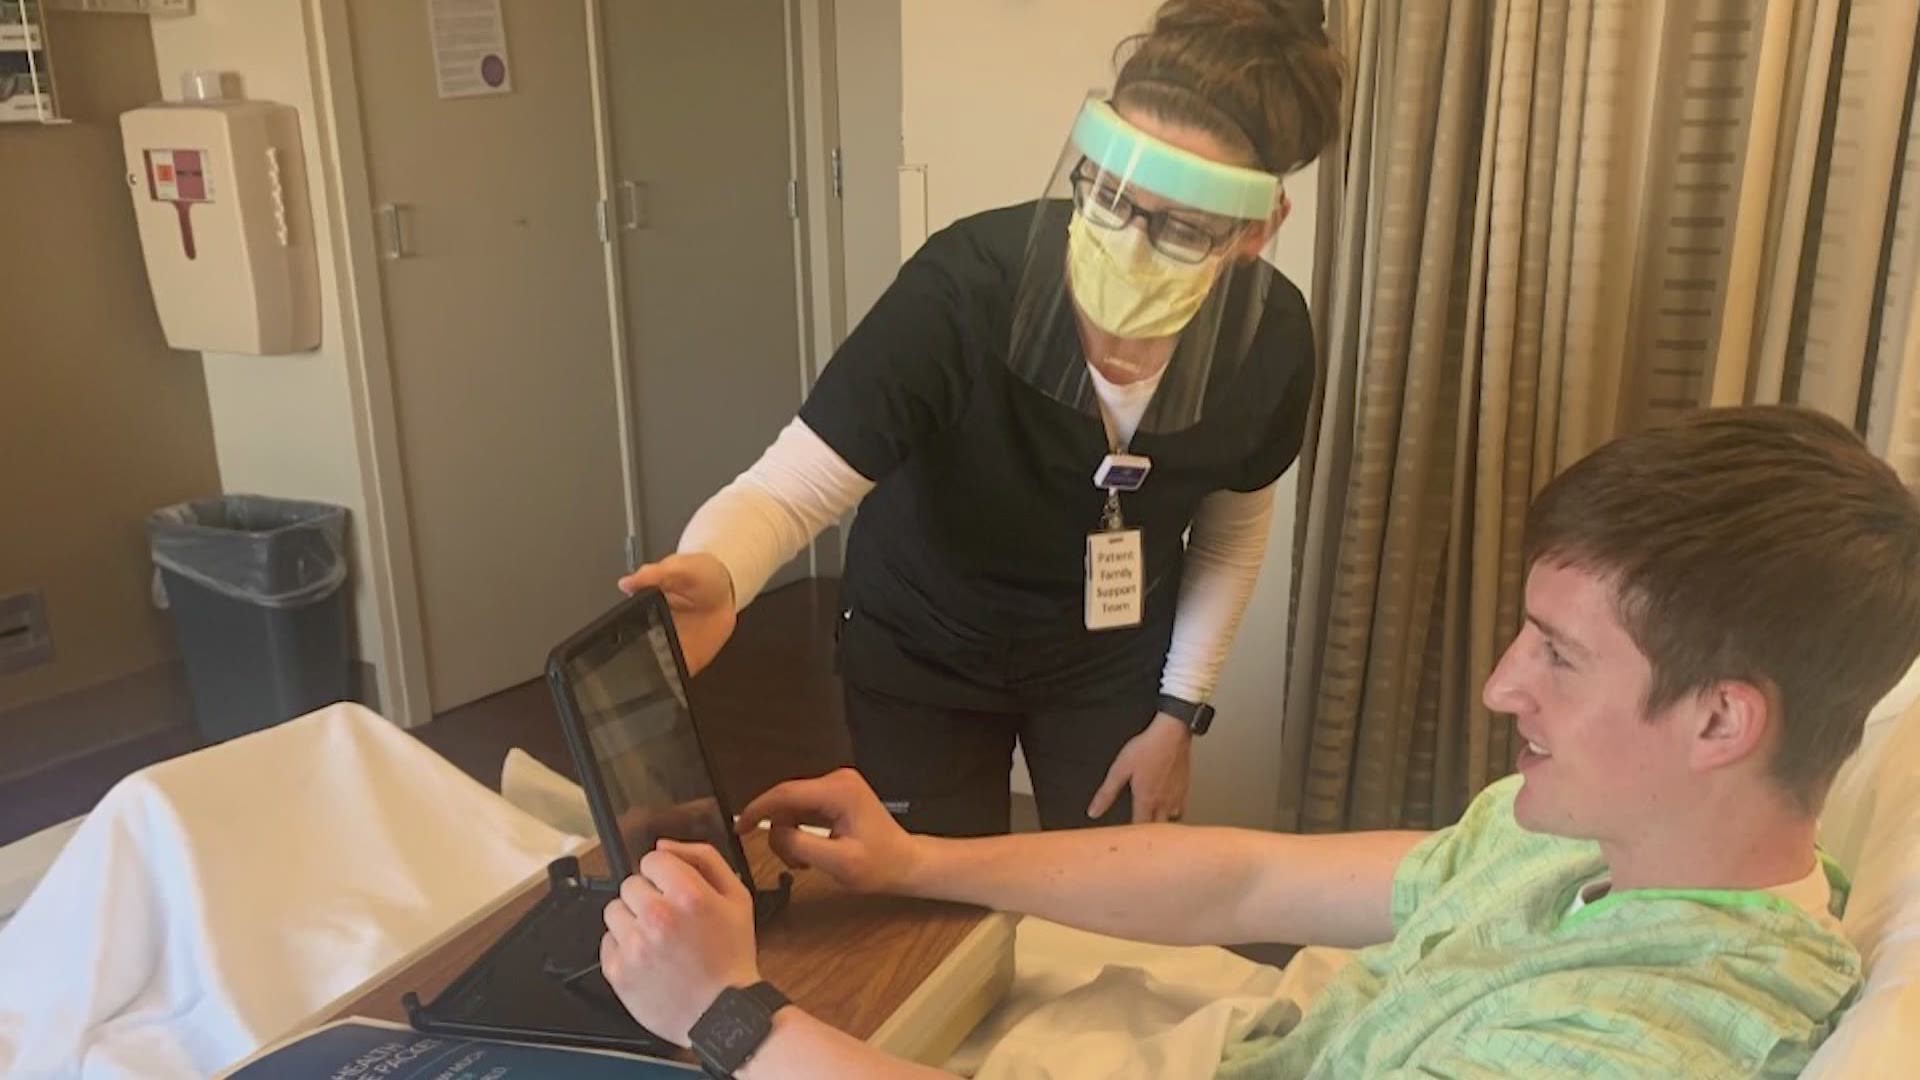 To help patients communicate with loved ones, UnityPoint Health began the Patient Family Support Team to bring in iPads and other devices.